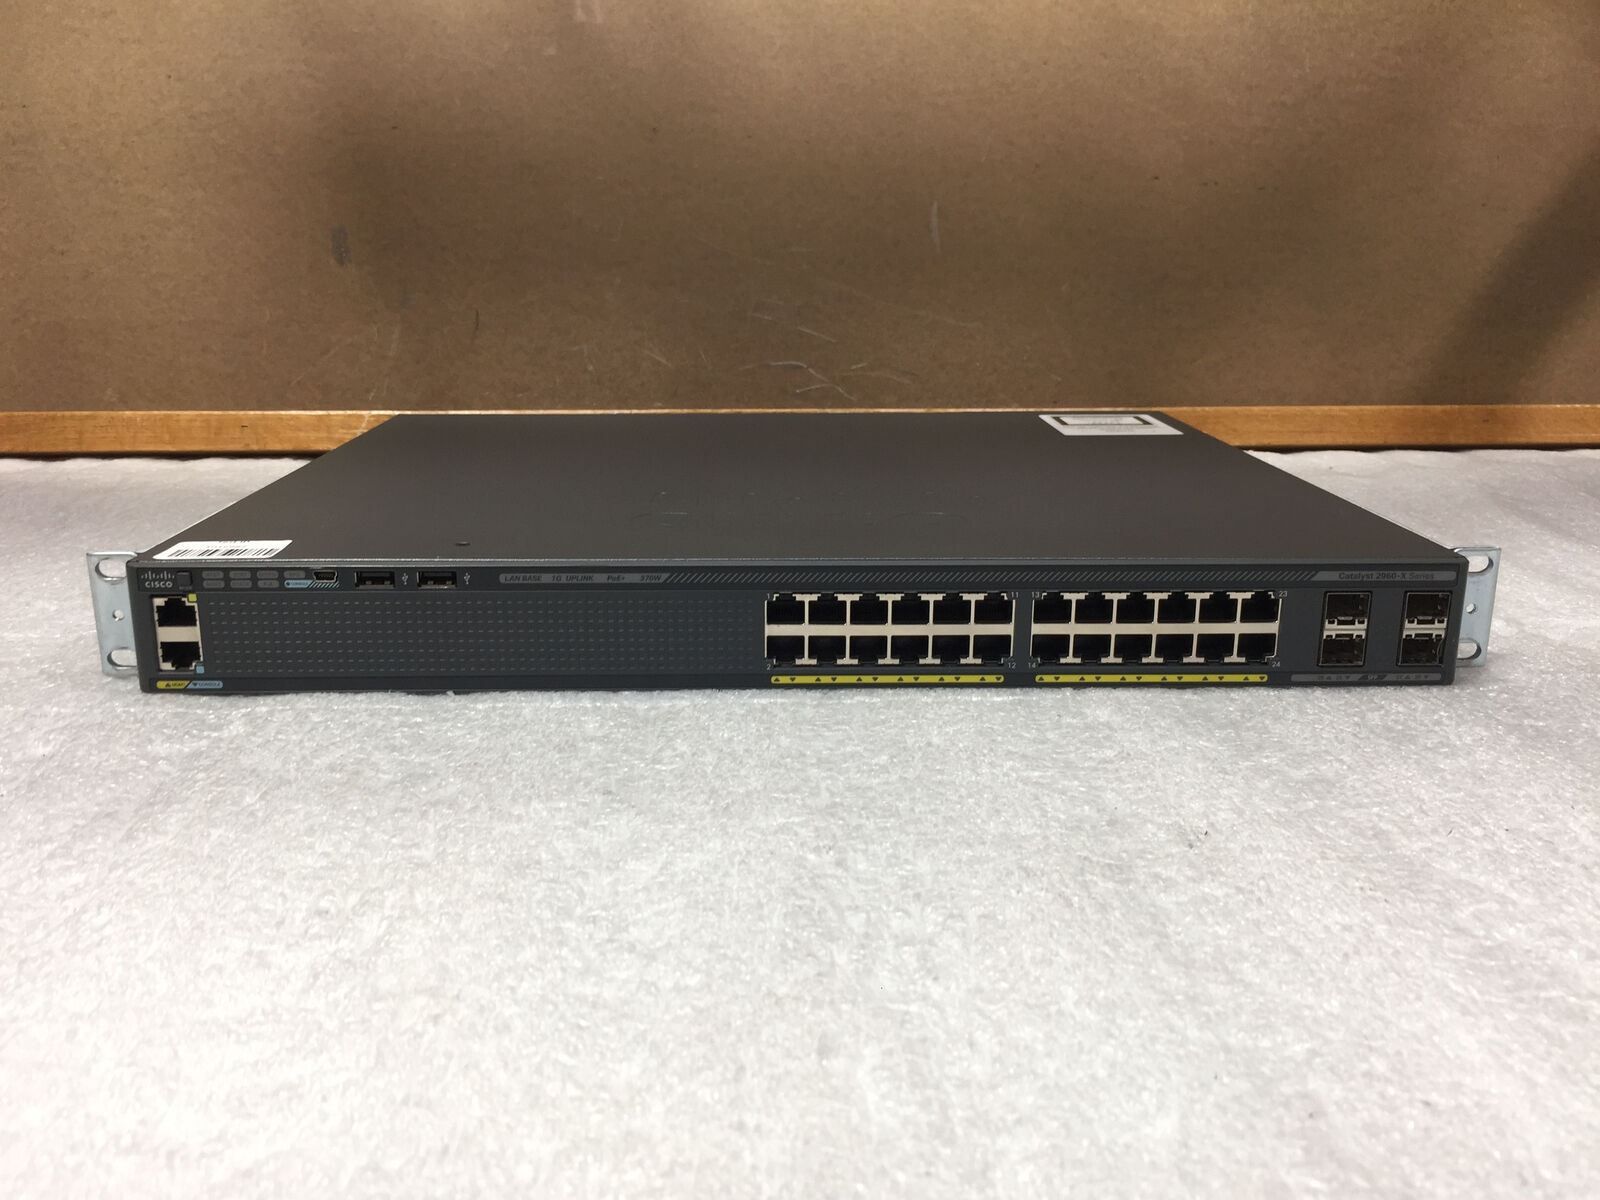 Cisco Catalyst 2960-X Series WS-C2960X-24PS-L V03 PoE+ Ethernet Switch -TESTED